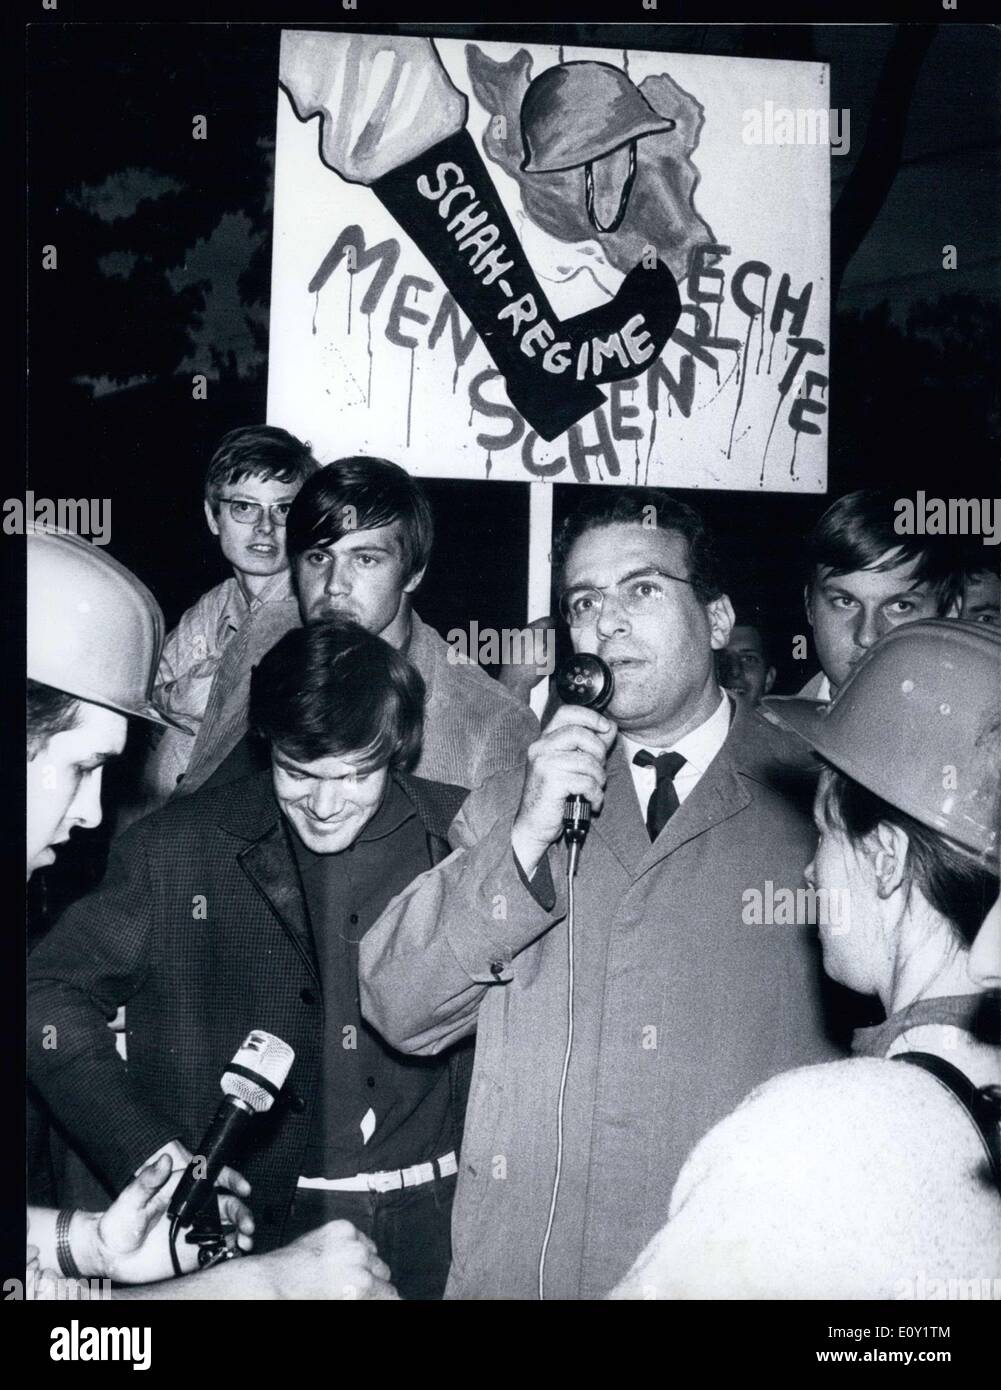 May 09, 1968 - A protest march from US barracks in Munich to the university itself took place in the city. The demonstrators, from the non-parliamentary opposition, were protesting against the Vietnam war, but also against dictatorships in general. Despite a growing mass of demonstrators, there were no incidents. Pictured at the microphone is Ernest Mandel from Brussels, Belgium. Stock Photo